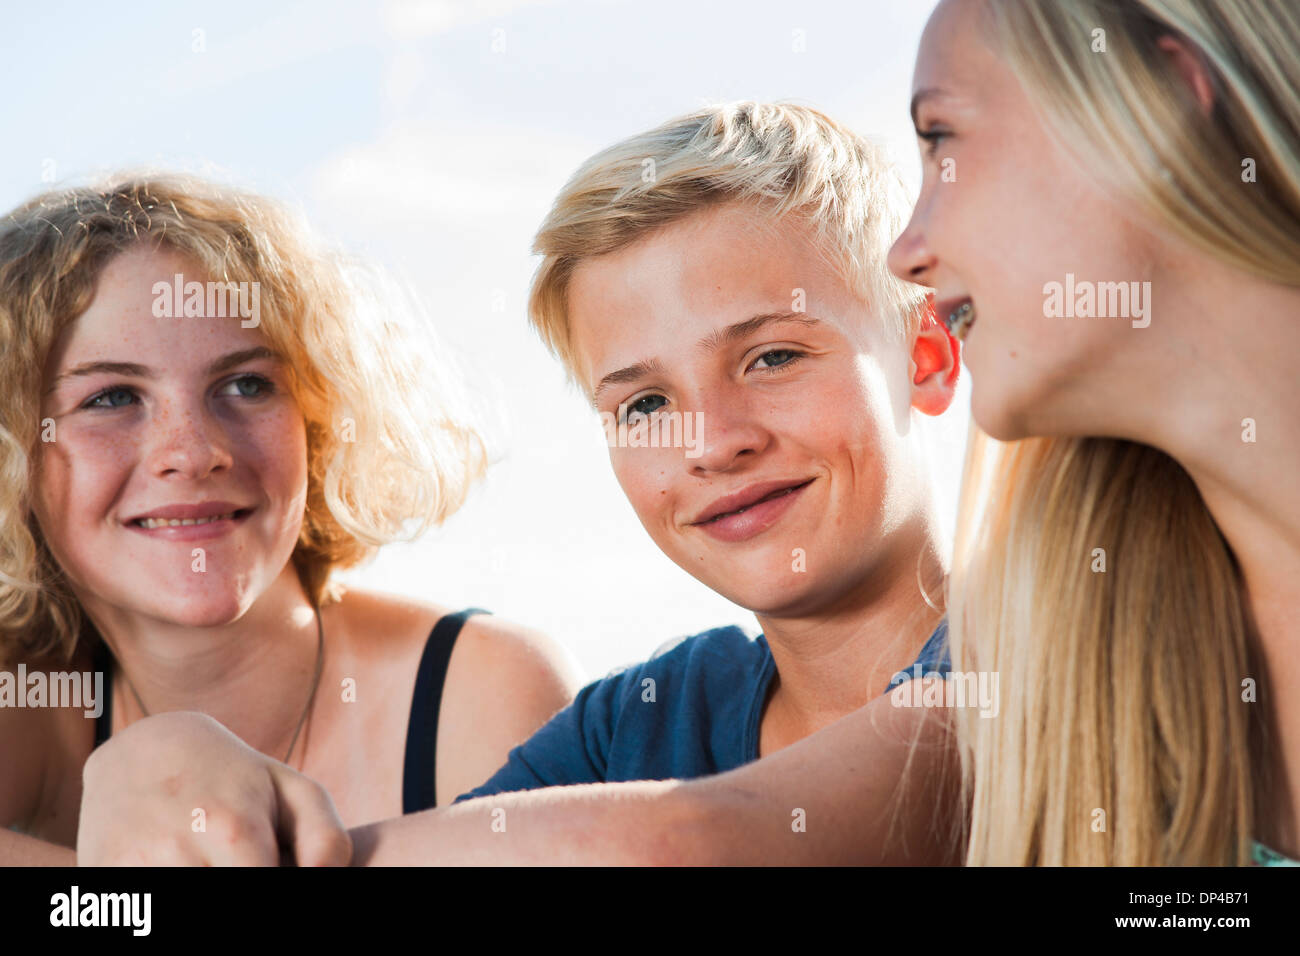 Close-up portrait of teenage girls and boy sitting outdoors, Germany Stock Photo